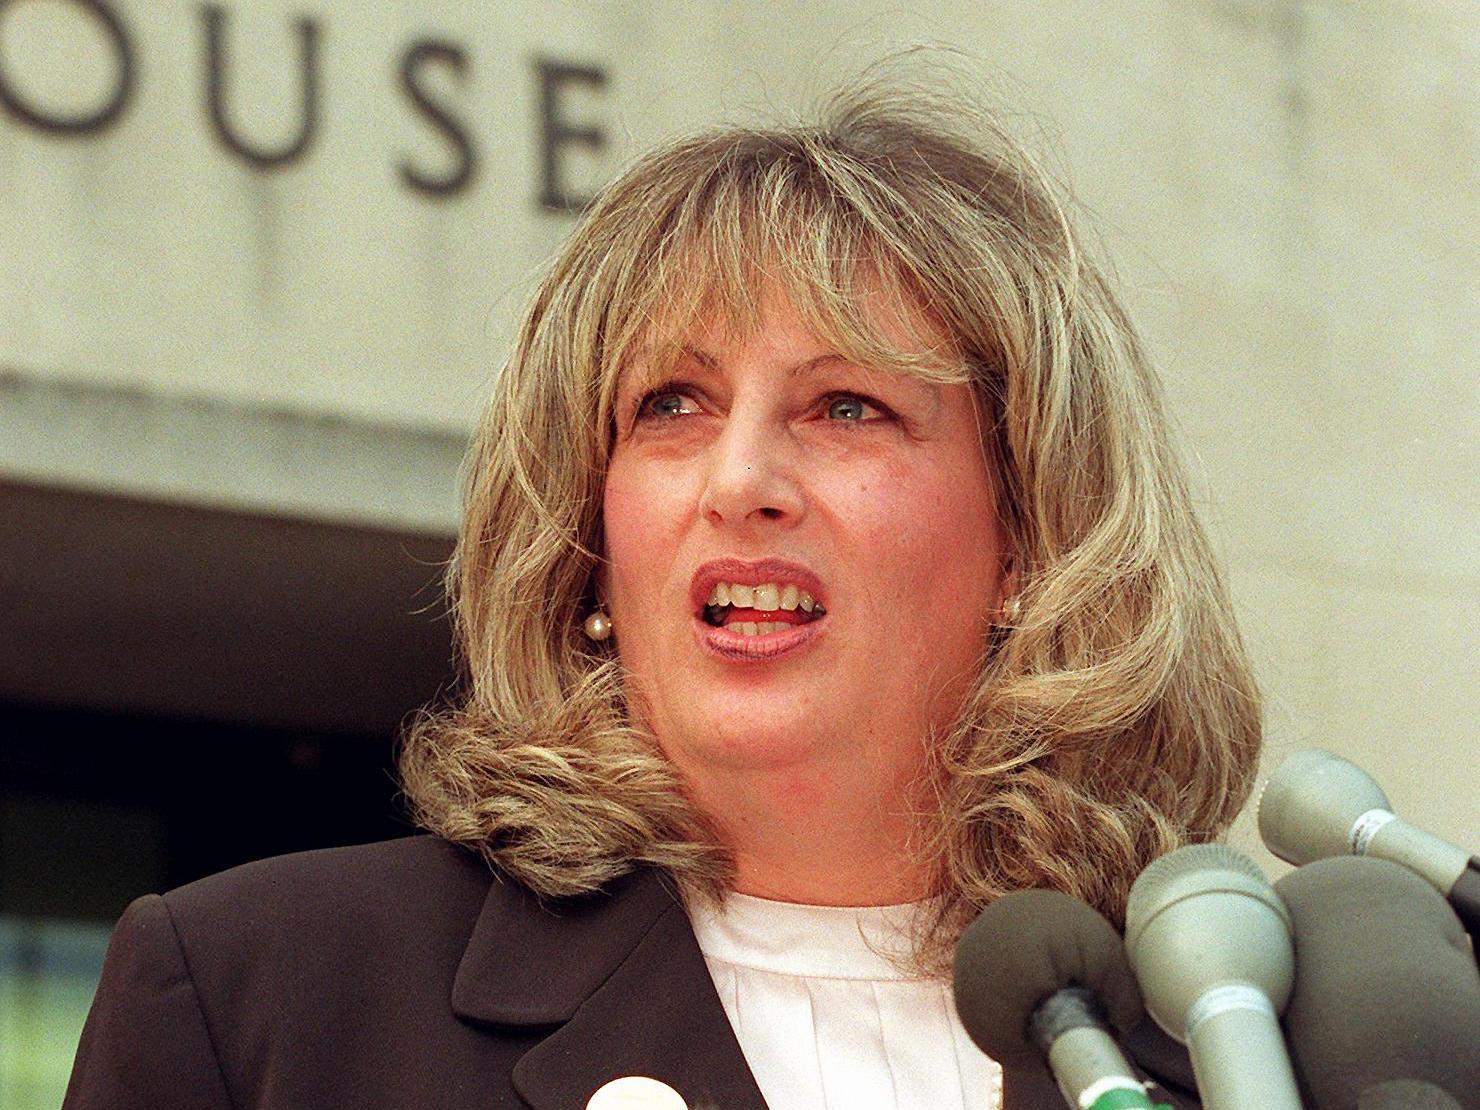 Linda Tripp talks to reporters outside of the Federal Courthouse in Washington DC during the Monica Lewinsky investigation